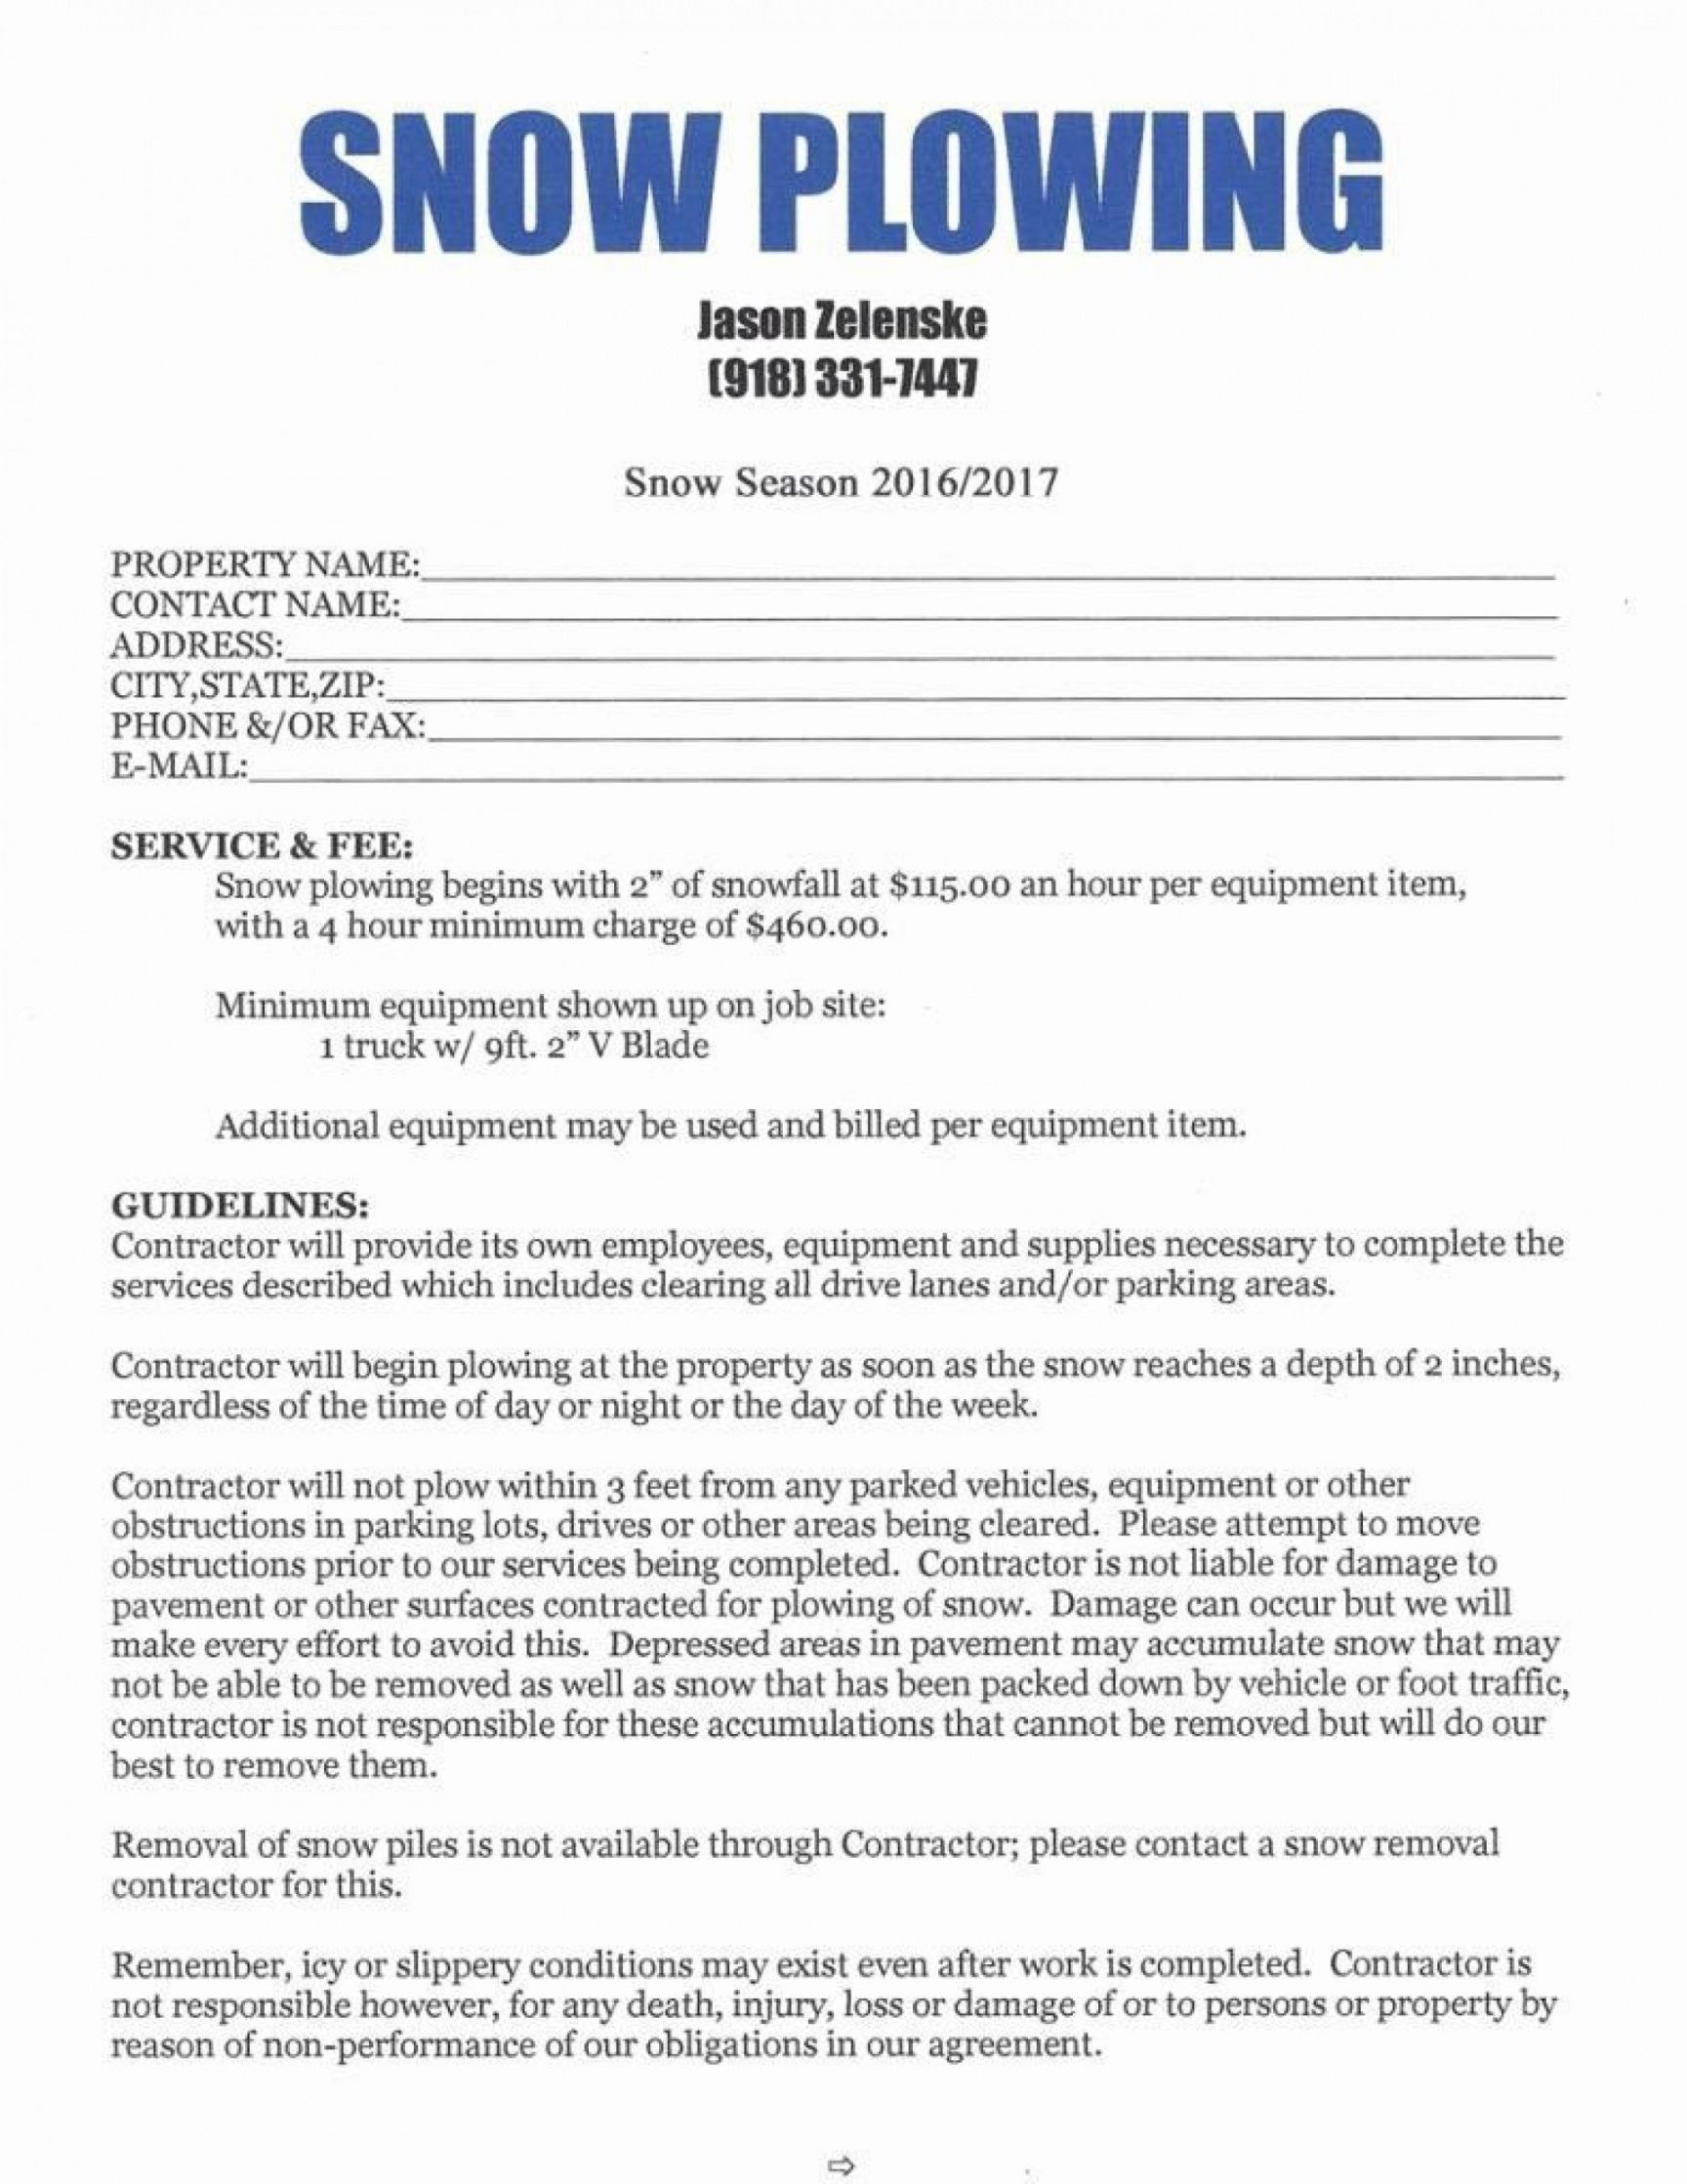 snow removal contract template ~ addictionary snow removal proposal template example